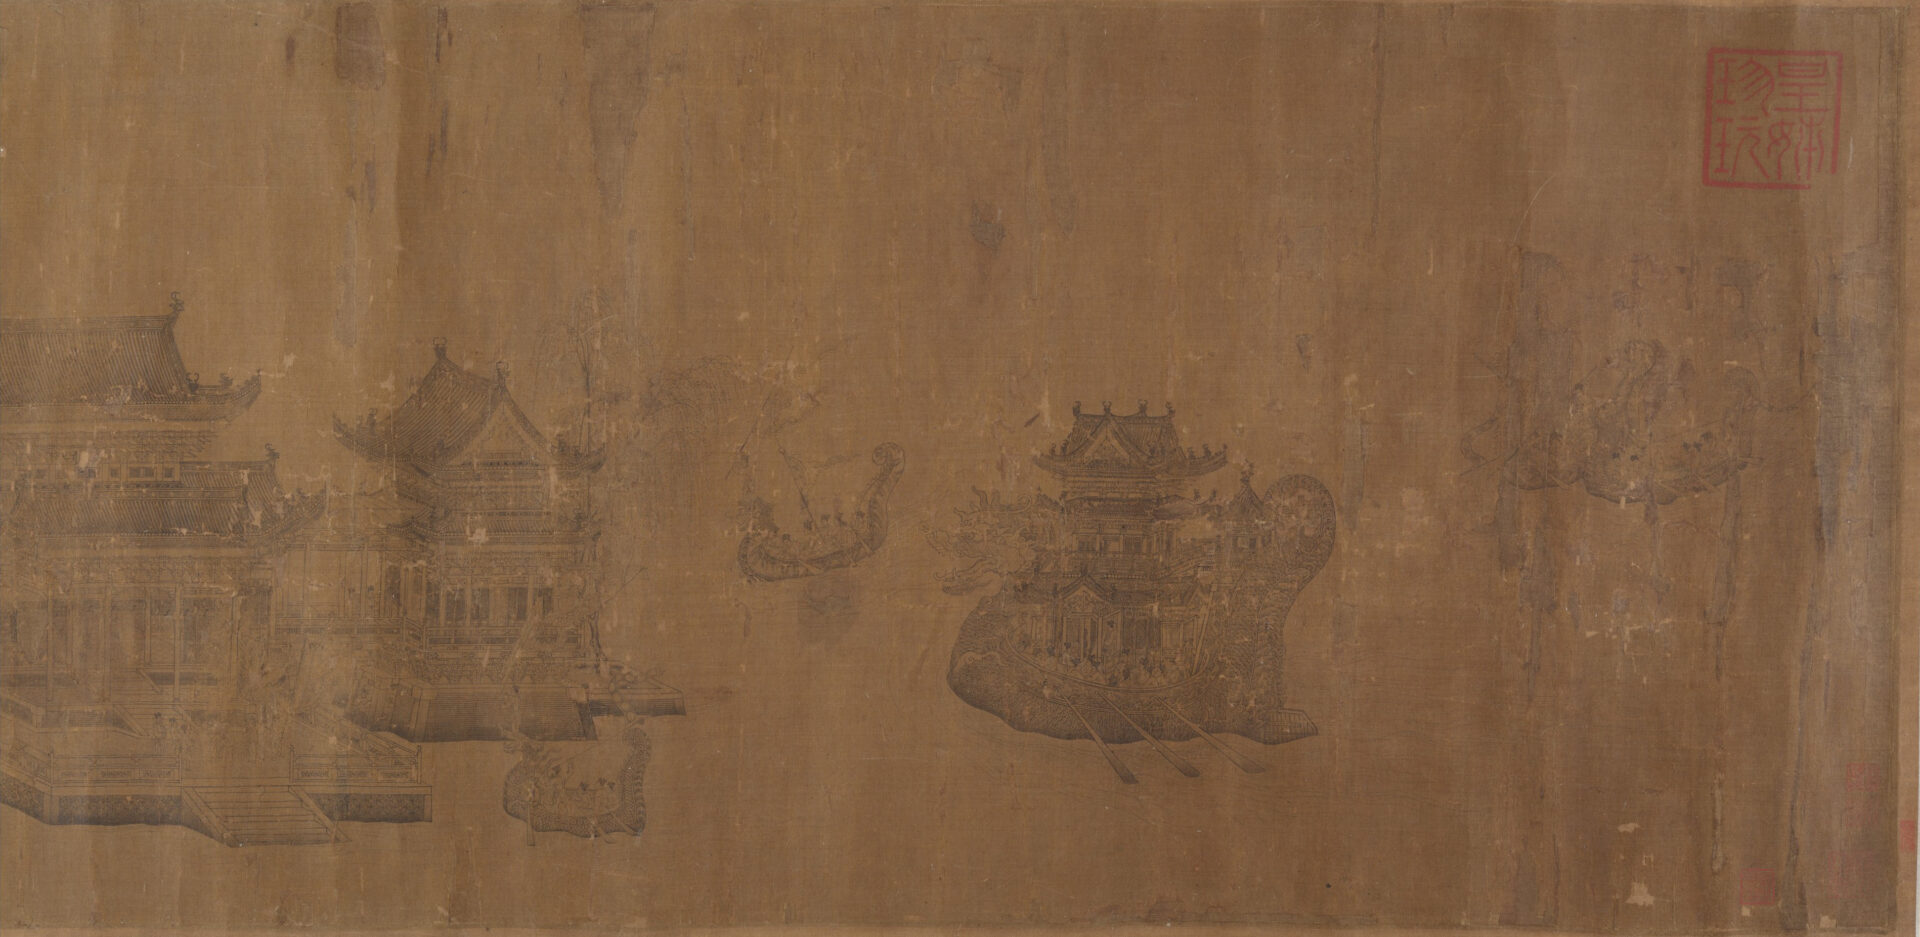 In these two images (handscroll; ink and color on silk) large crowds of figures stand on the riverbank watching the river boats sailing past. In the centre is a large bridge connecting the two banks, with wooden buildings along each side. 